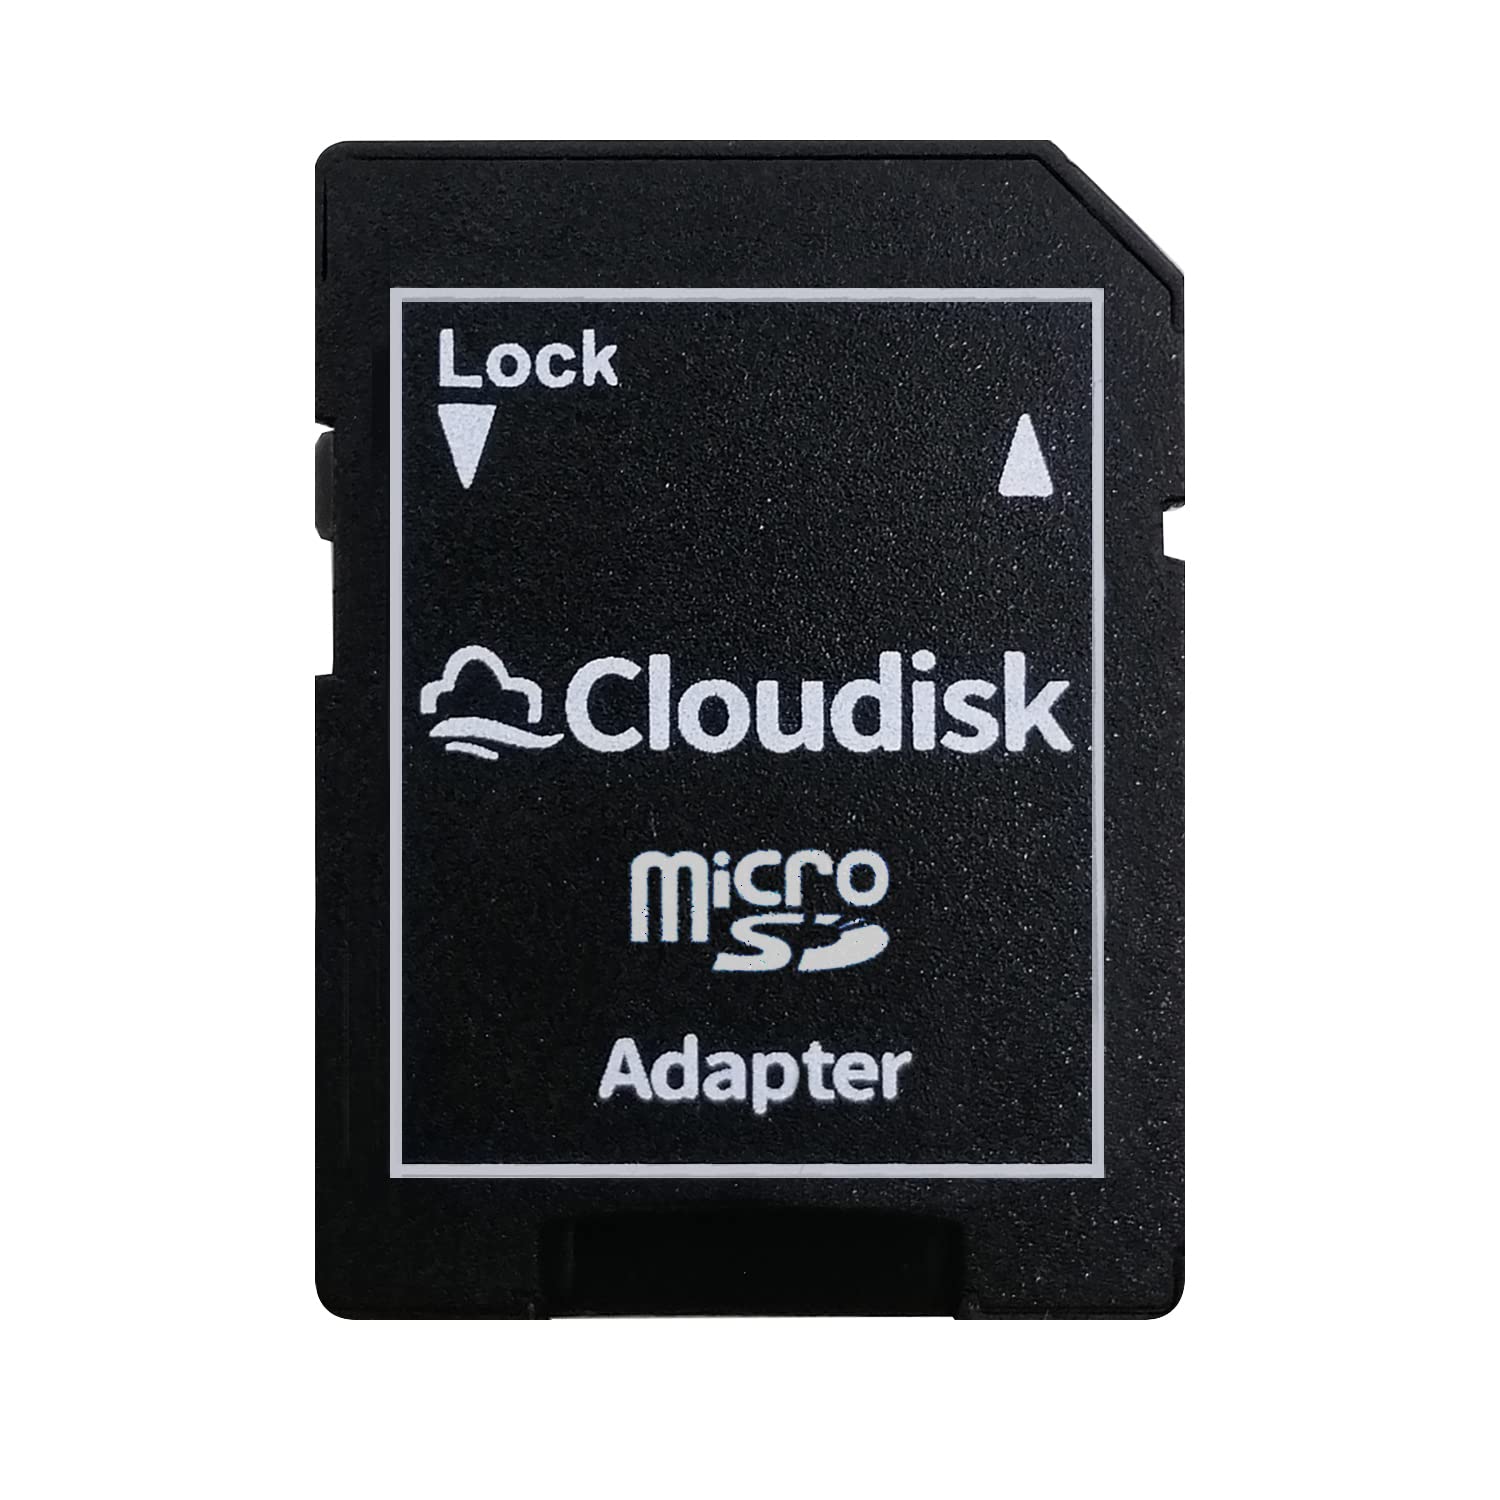 Cloudisk Small Capacity 5Pack 256MB Micro SD Card in Bulk Pack (NOT GB) with SD Adapter USB Card Reader Memory Card for Small Data, Files, Advertising or Promotion (Too Small for Any Videos)